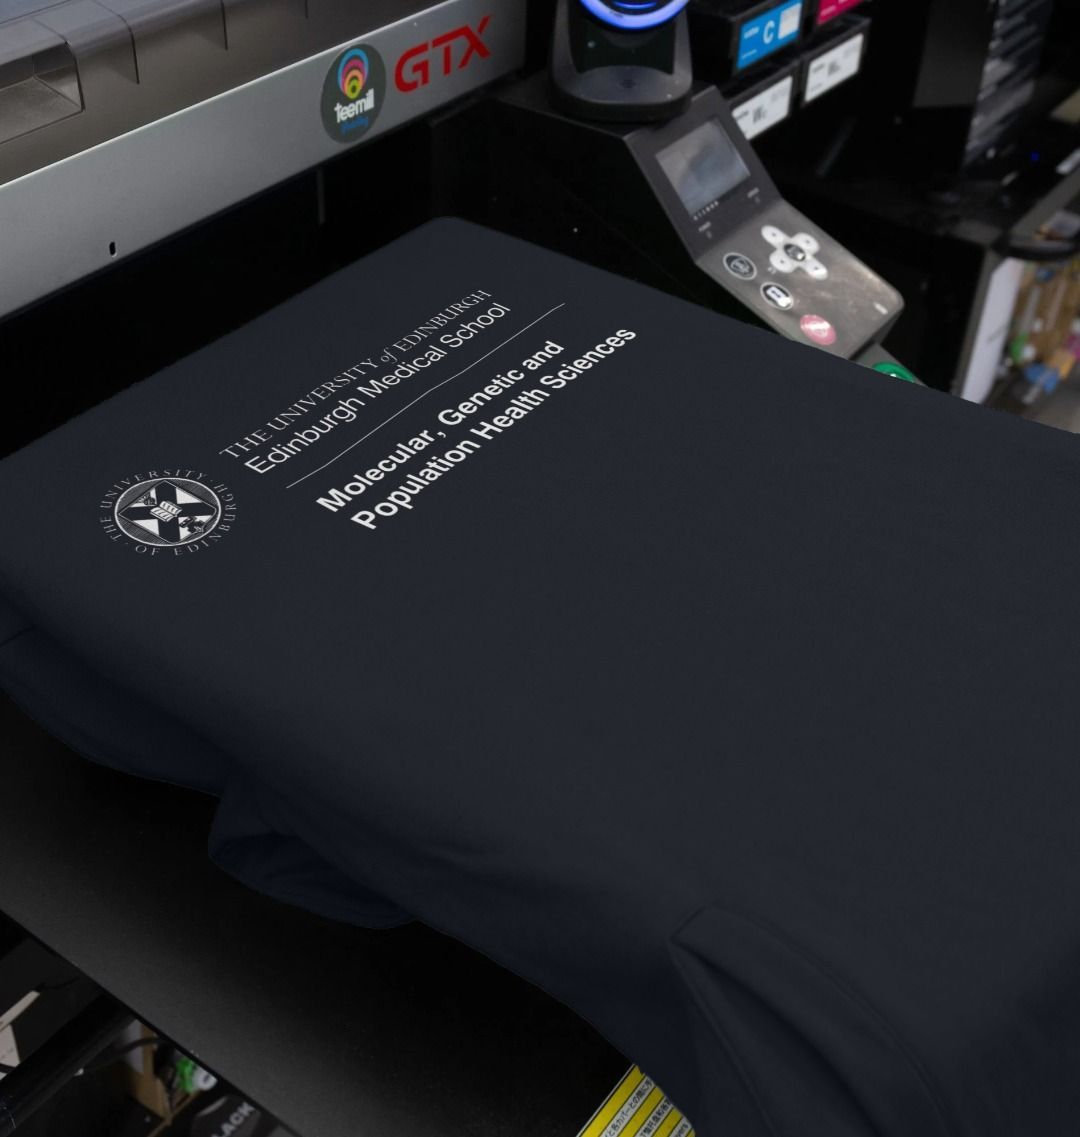 Our Edinburgh Medical School -Molecular, Genetic and Population Health Sciences Hoodie being printed by our print on demand partner, teemill